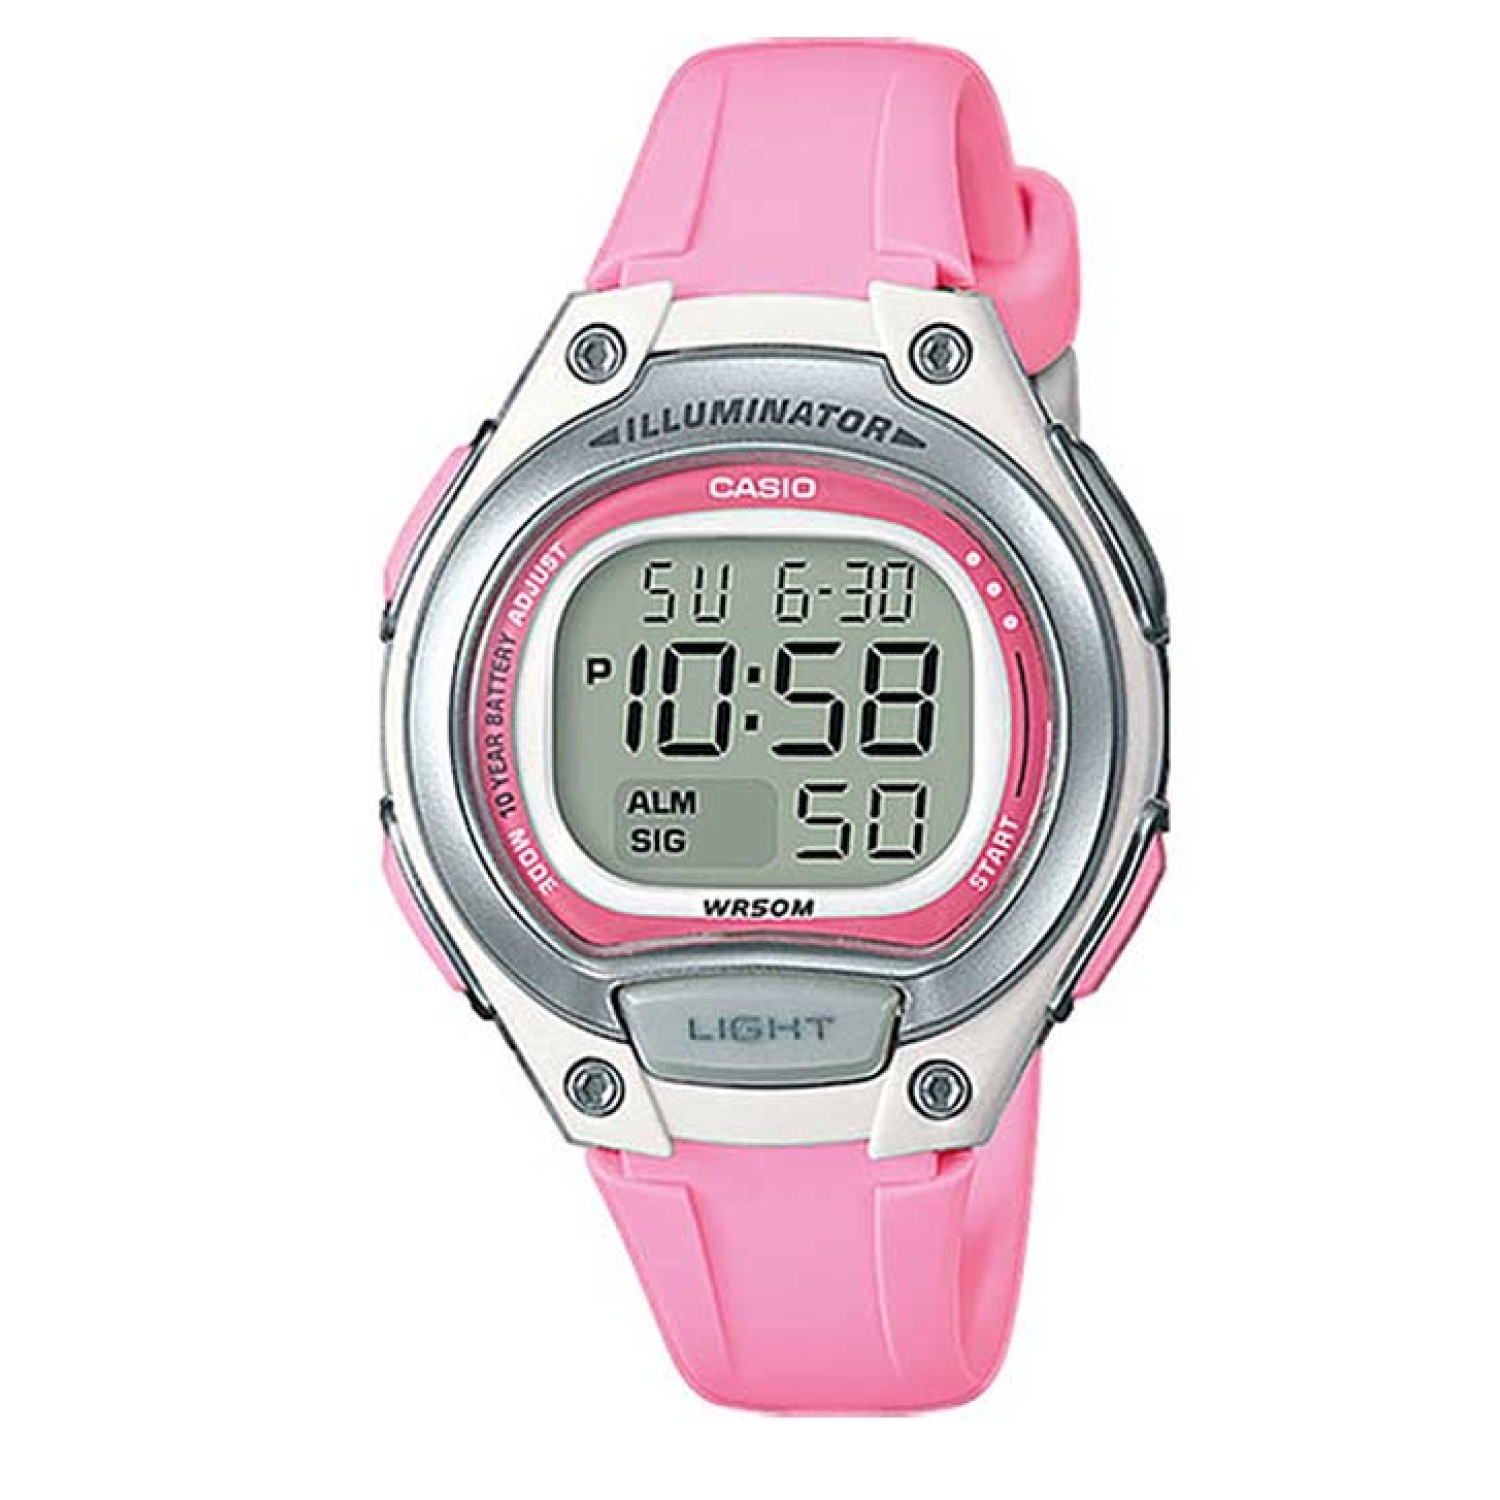 LW203-4A Casio 50 Metres 10 Year Battery Watch. Casio’s Illuminator digital watch is a sleek and sporty timepiece featuring a black plastic resin band, a metallic resin case and a large digital time display with stopwatch and day and date functions. Water